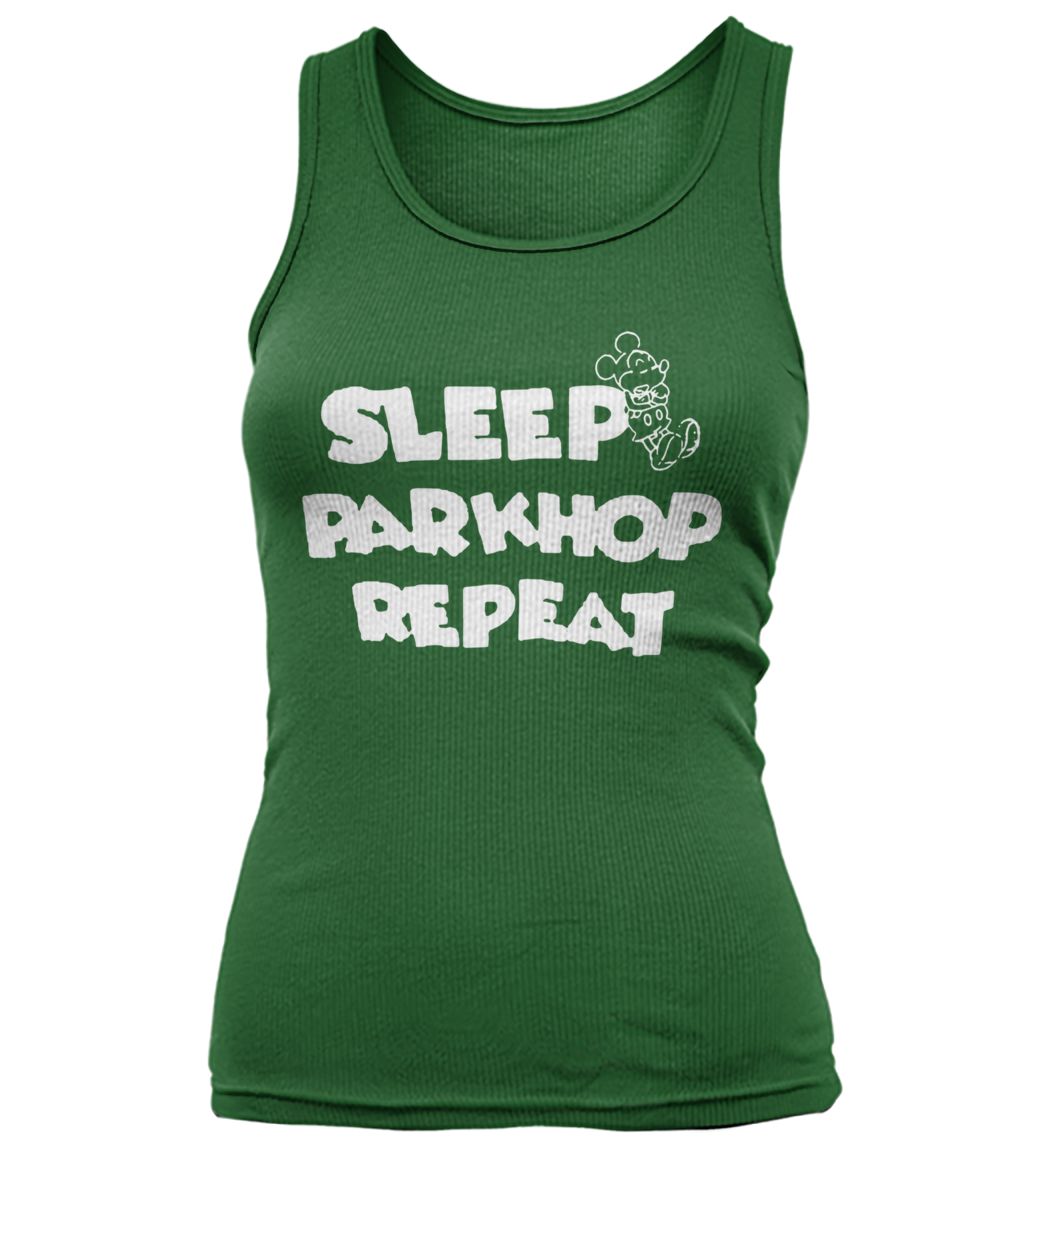 Mickey mouse sleep parkhop repeat women's tank top